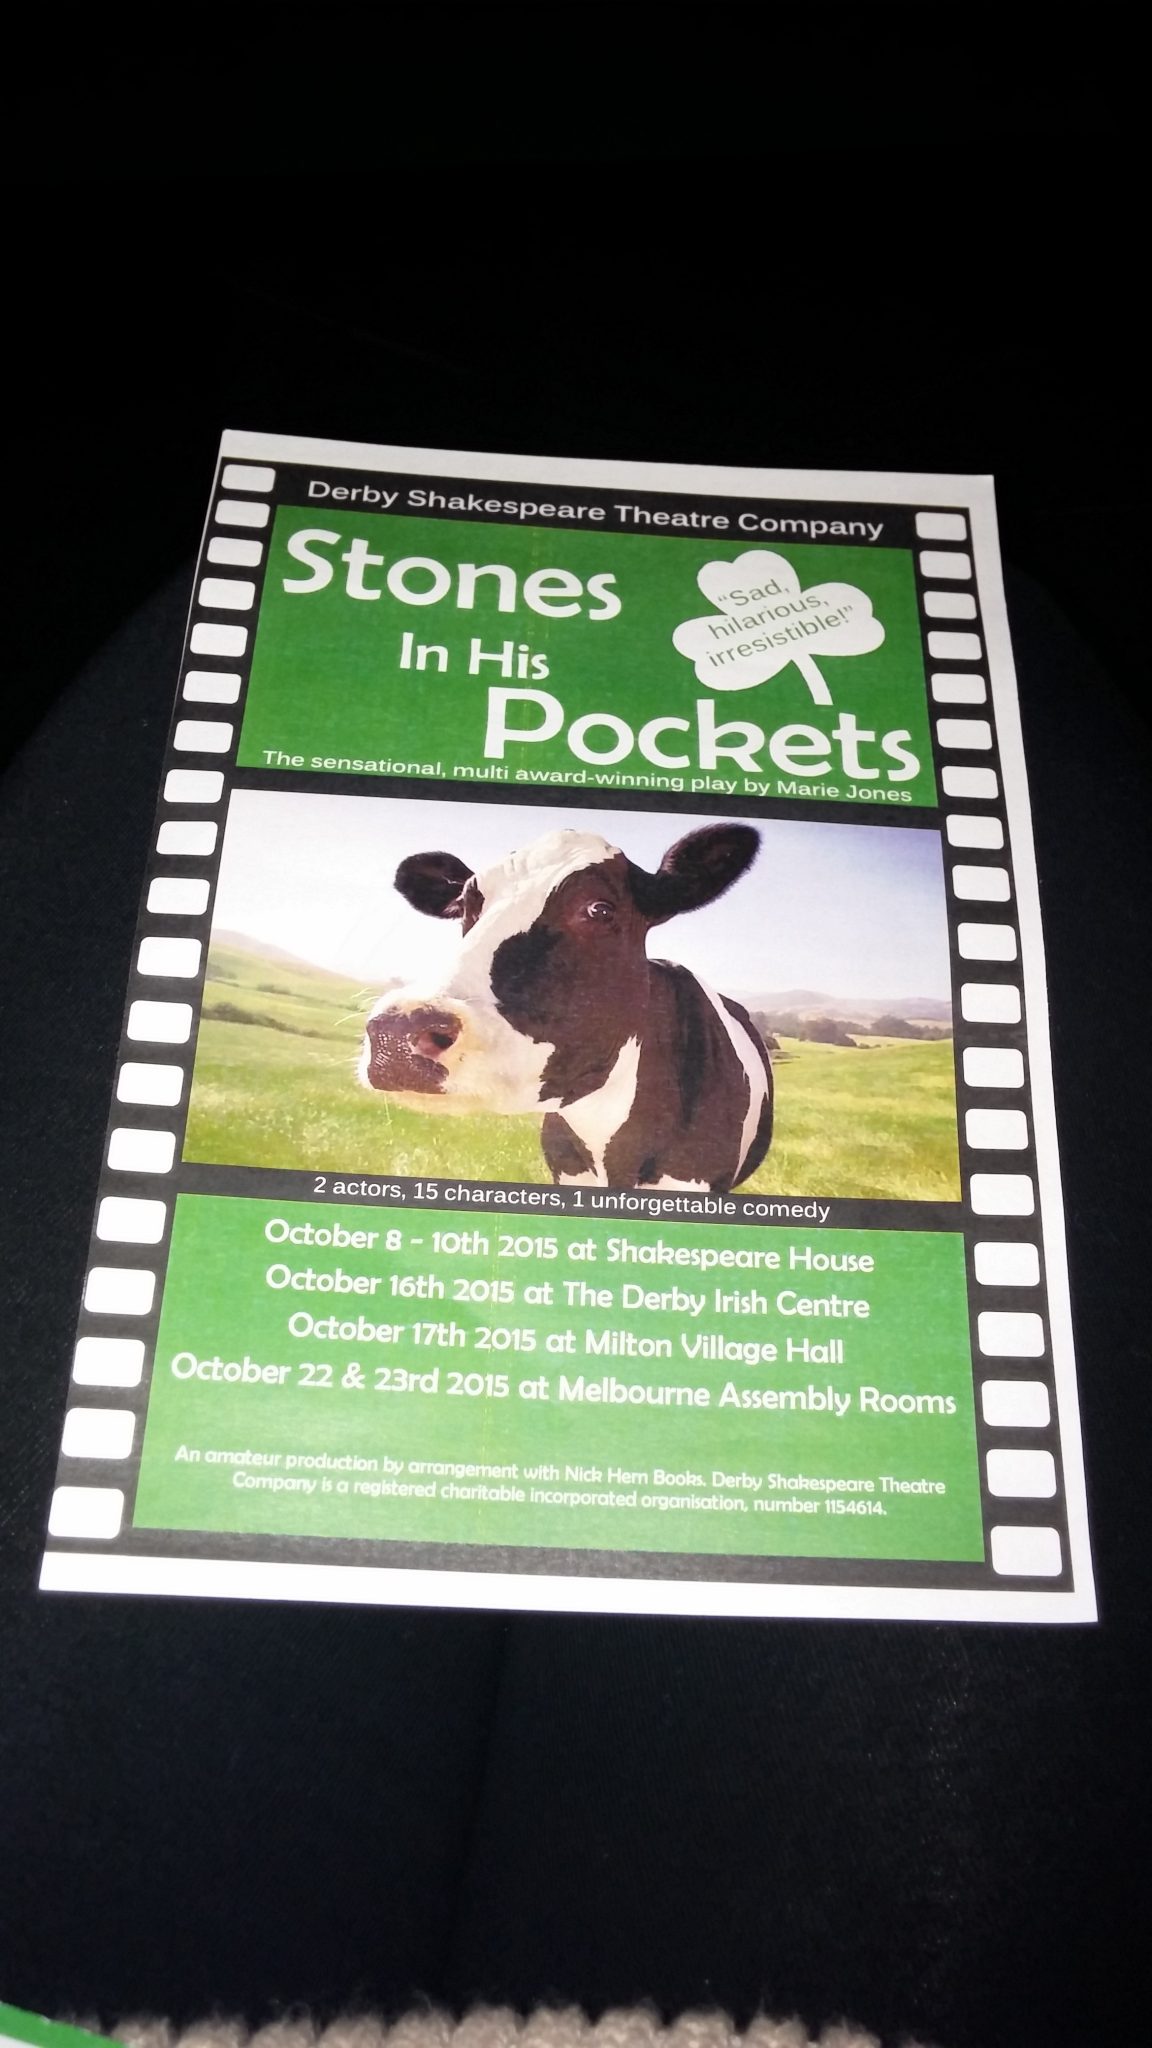 Theatre Review: Stones in his Pockets (Marie Jones); Derby Shakespeare Theatre Company